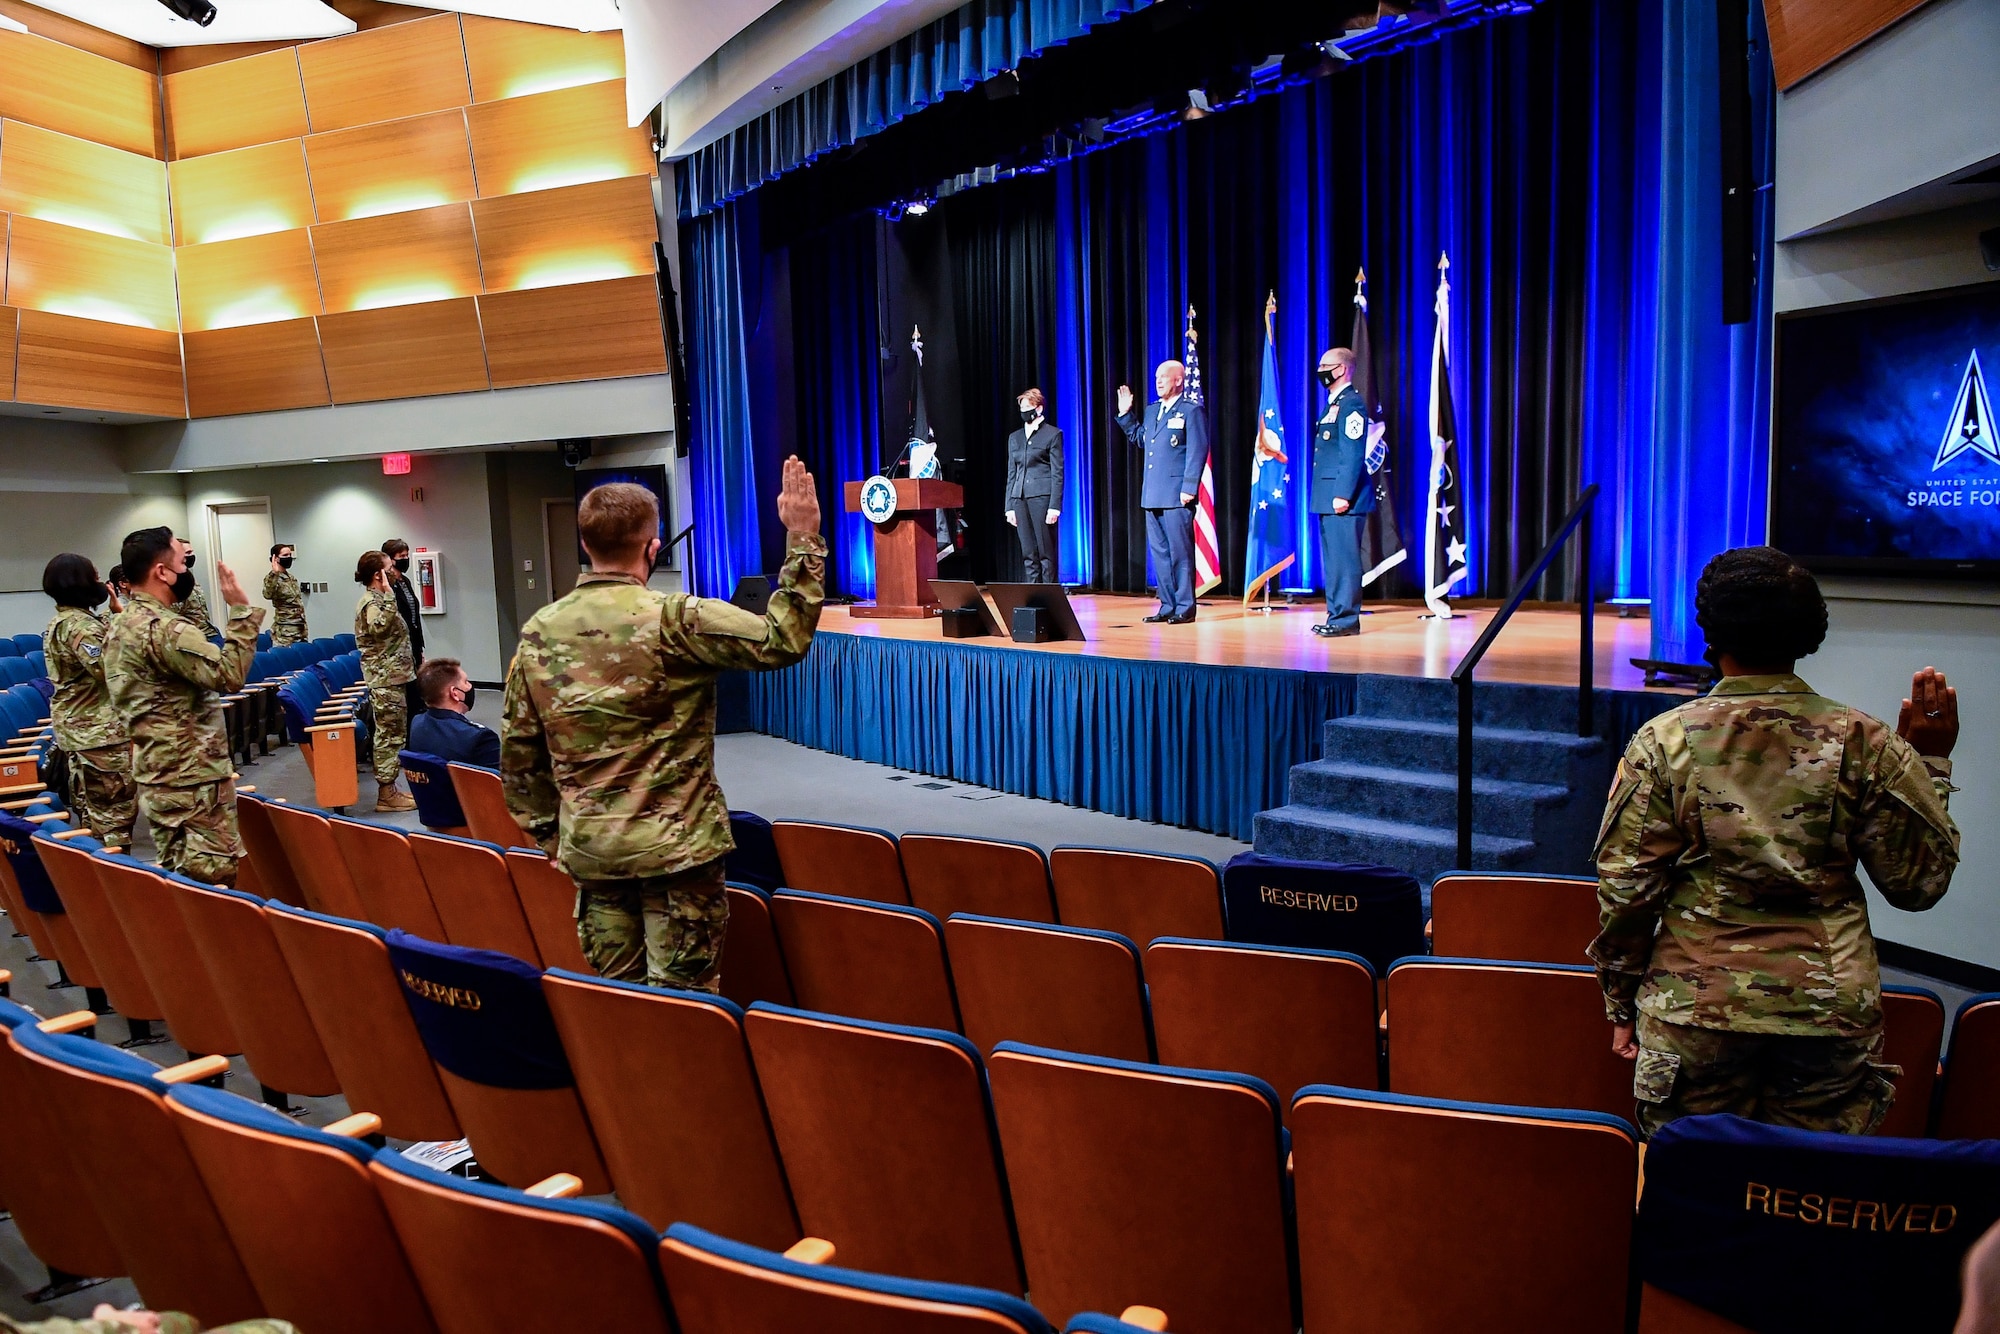 Chief of Space Operations Gen. John W. Raymond, center rear, administers the oath of office to airmen transferring into the U.S. Space Force during a ceremony at the Pentagon, Arlington, Va., Sept. 15, 2020. About 300 airmen at bases worldwide, including 22 in the audience, transferred during the ceremony.  (U.S. Air Force photo by Eric R. Dietrich)